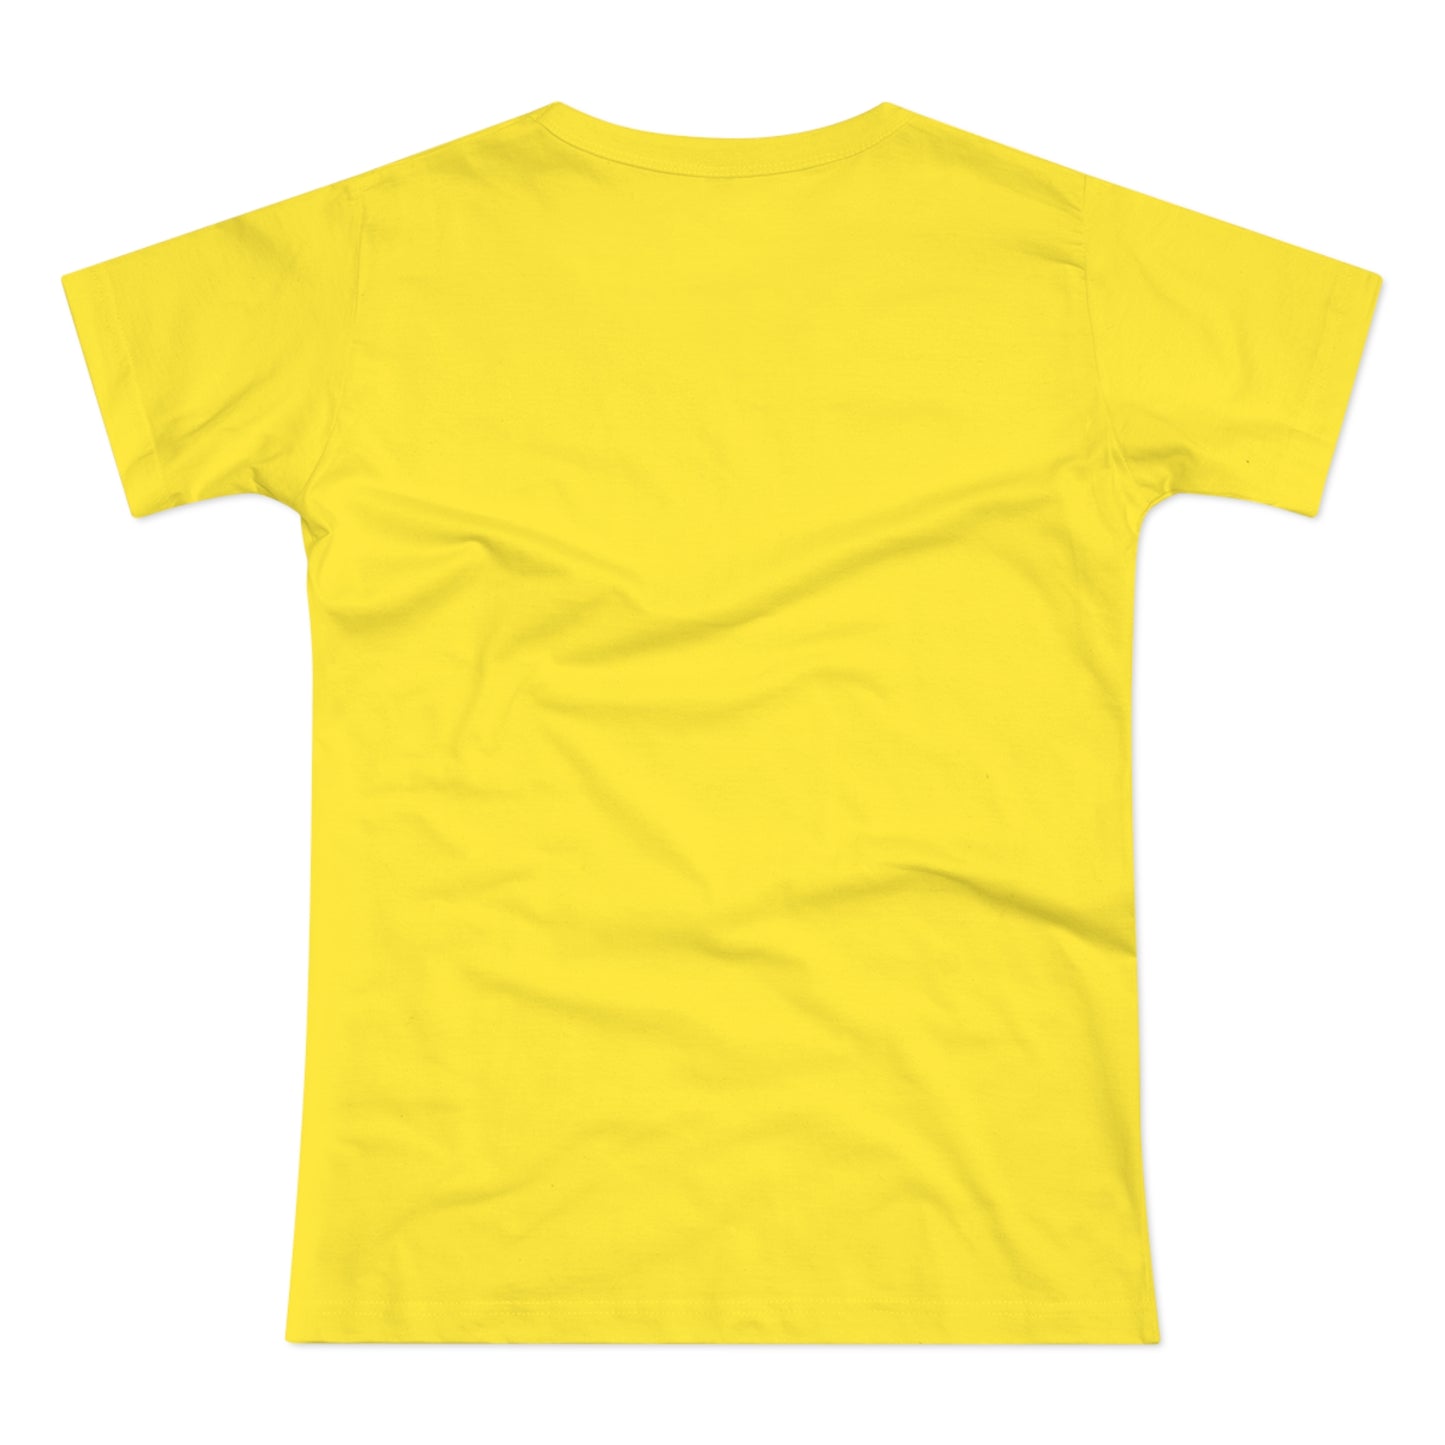 a yellow t - shirt on a white background